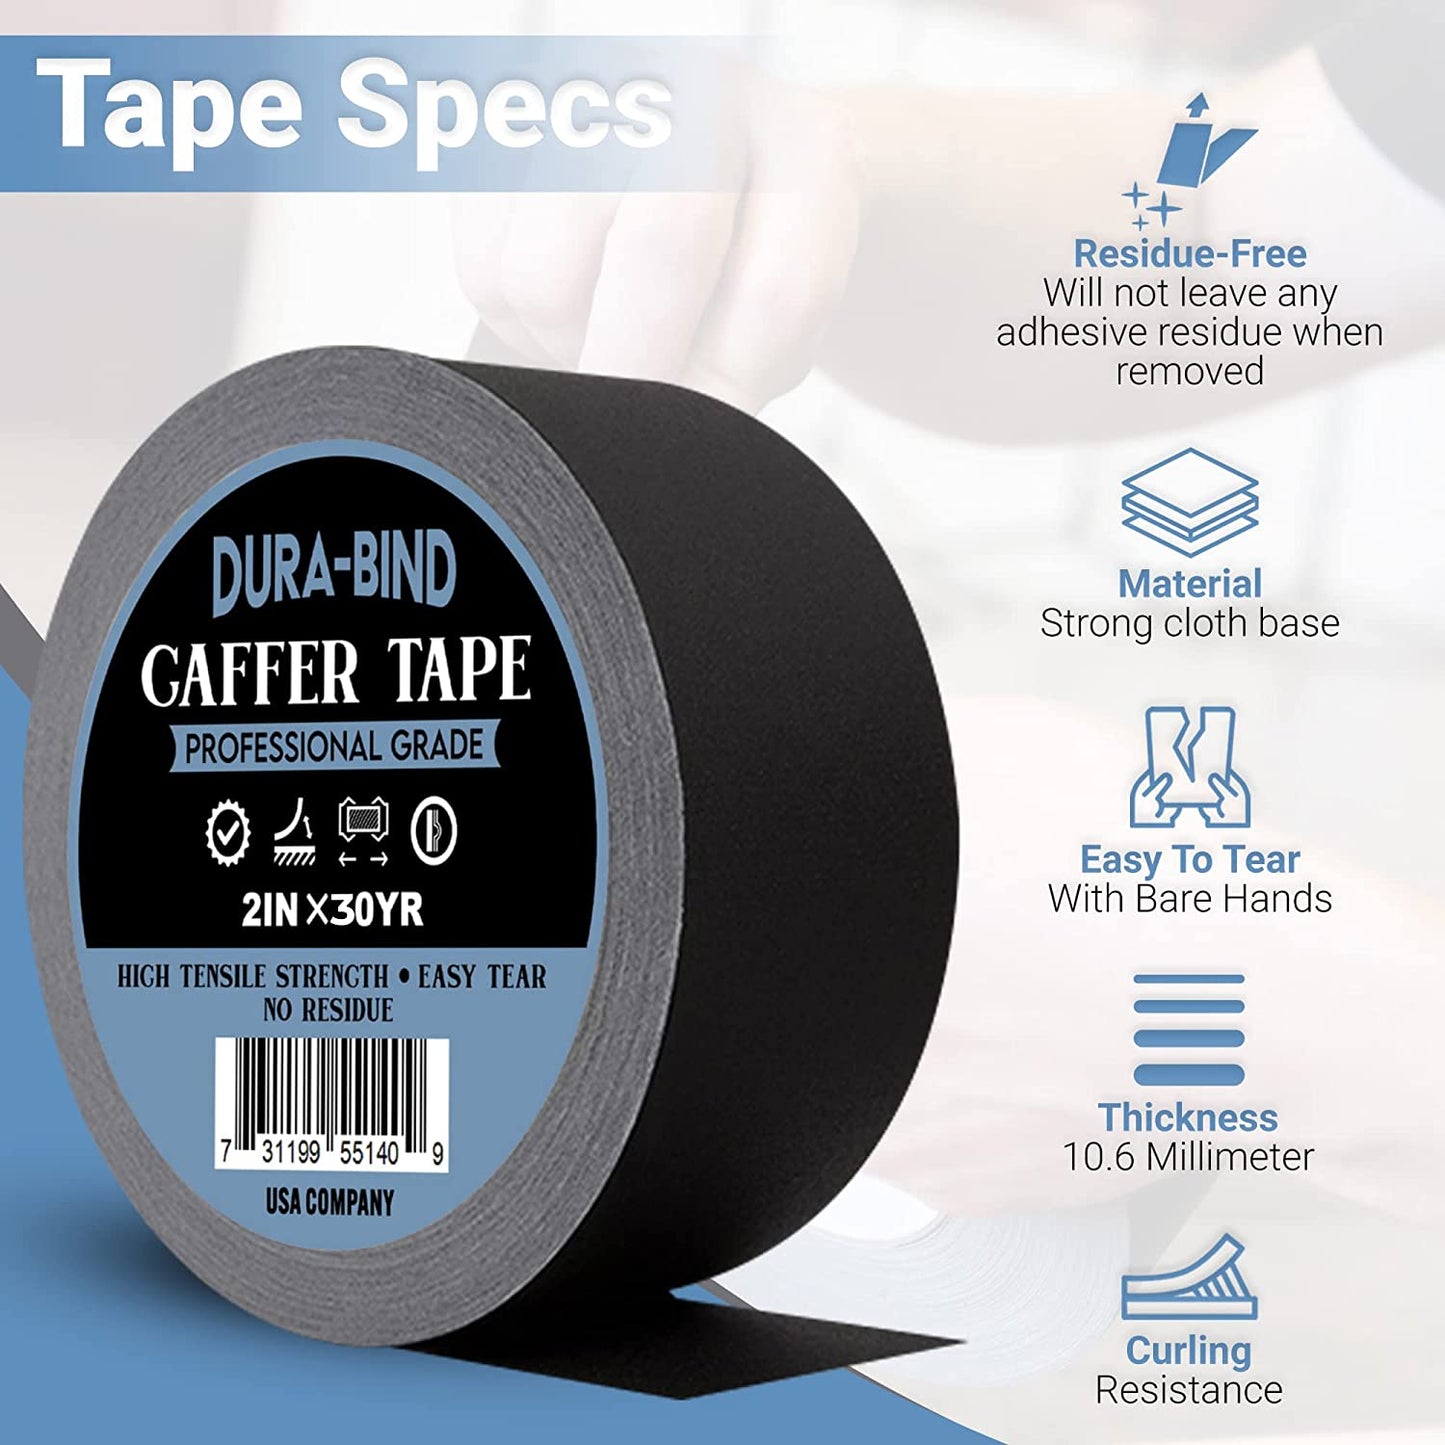 Dura-Bind Gaffer Tape, Premium Black 2 inches x 30 Yards, Matte Fabric Painters Cloth Tape, Safe for Floor Wall, Leaves No Residue, Pro Blackout Non-Reflective protapes for Electrical Cords Cable